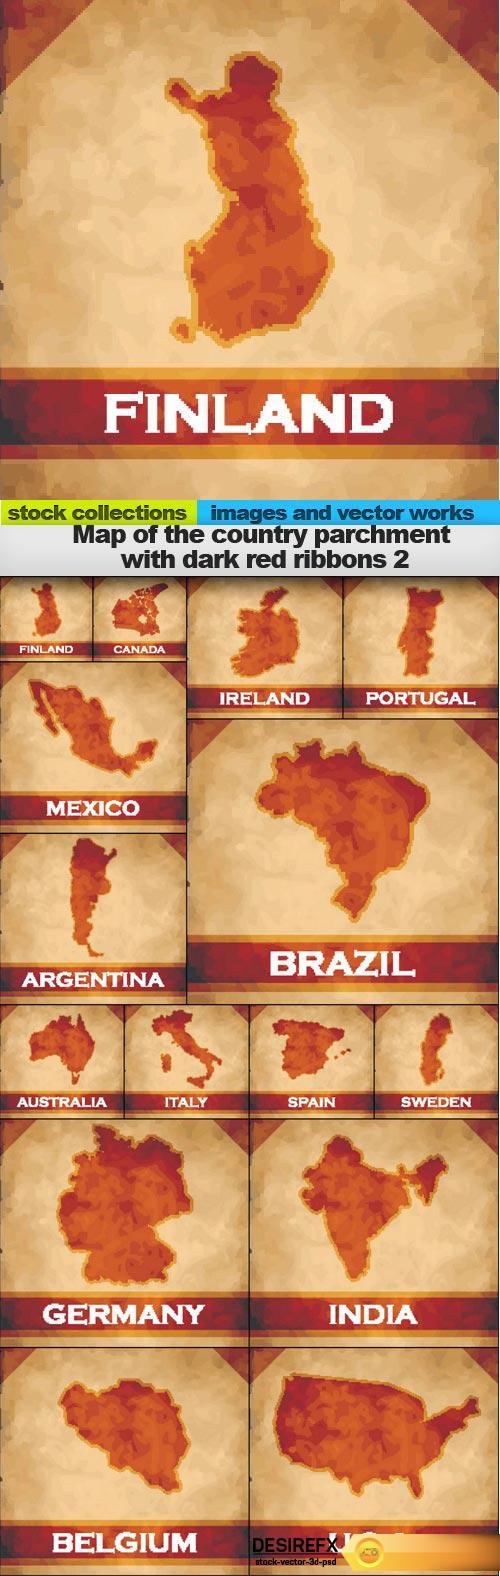 Map of the country parchment with dark red ribbons 2, 15 x EPS